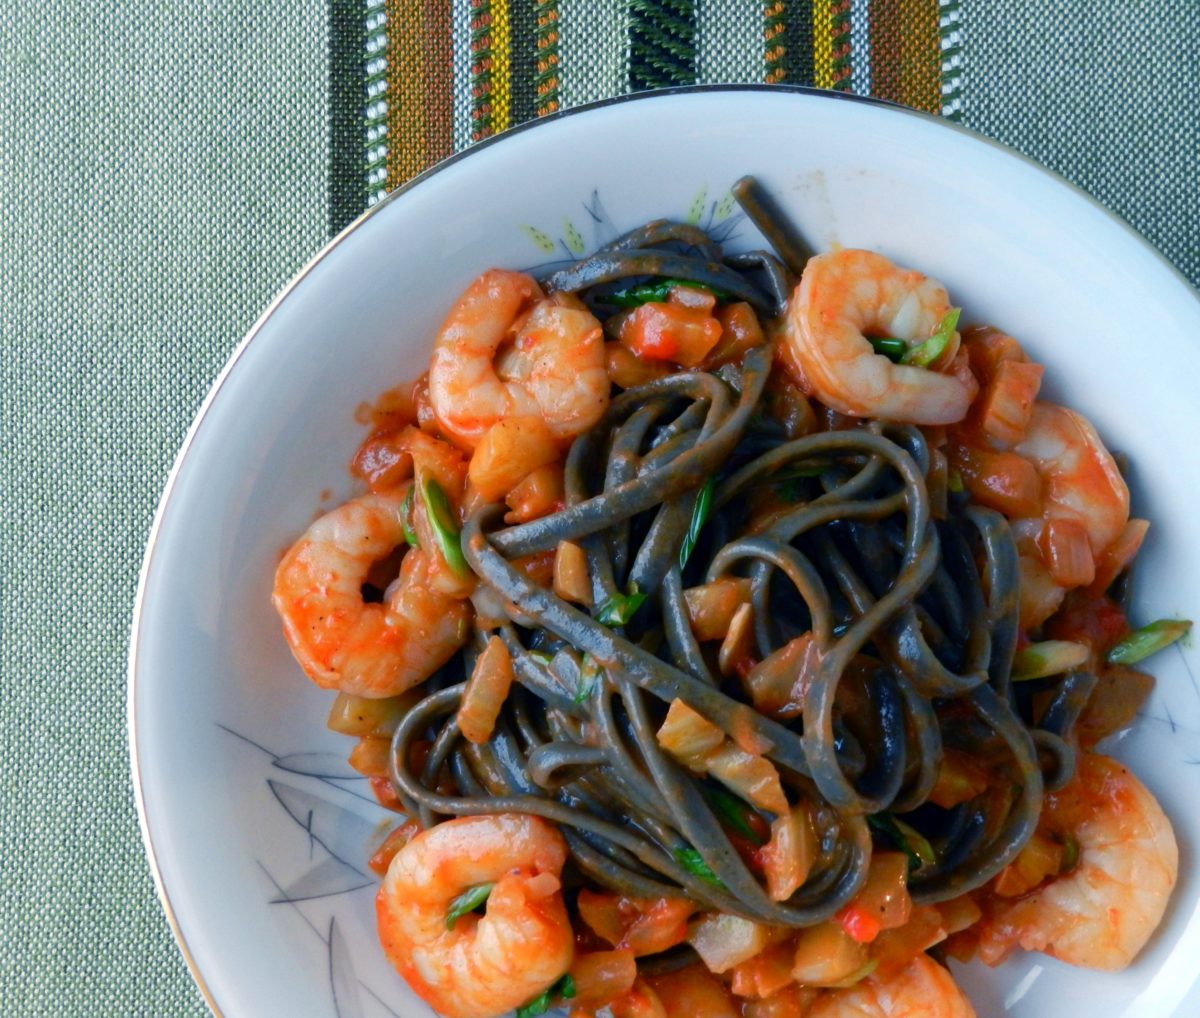 Black Fettuccine with Fennel, Shrimp, and Chili Oil